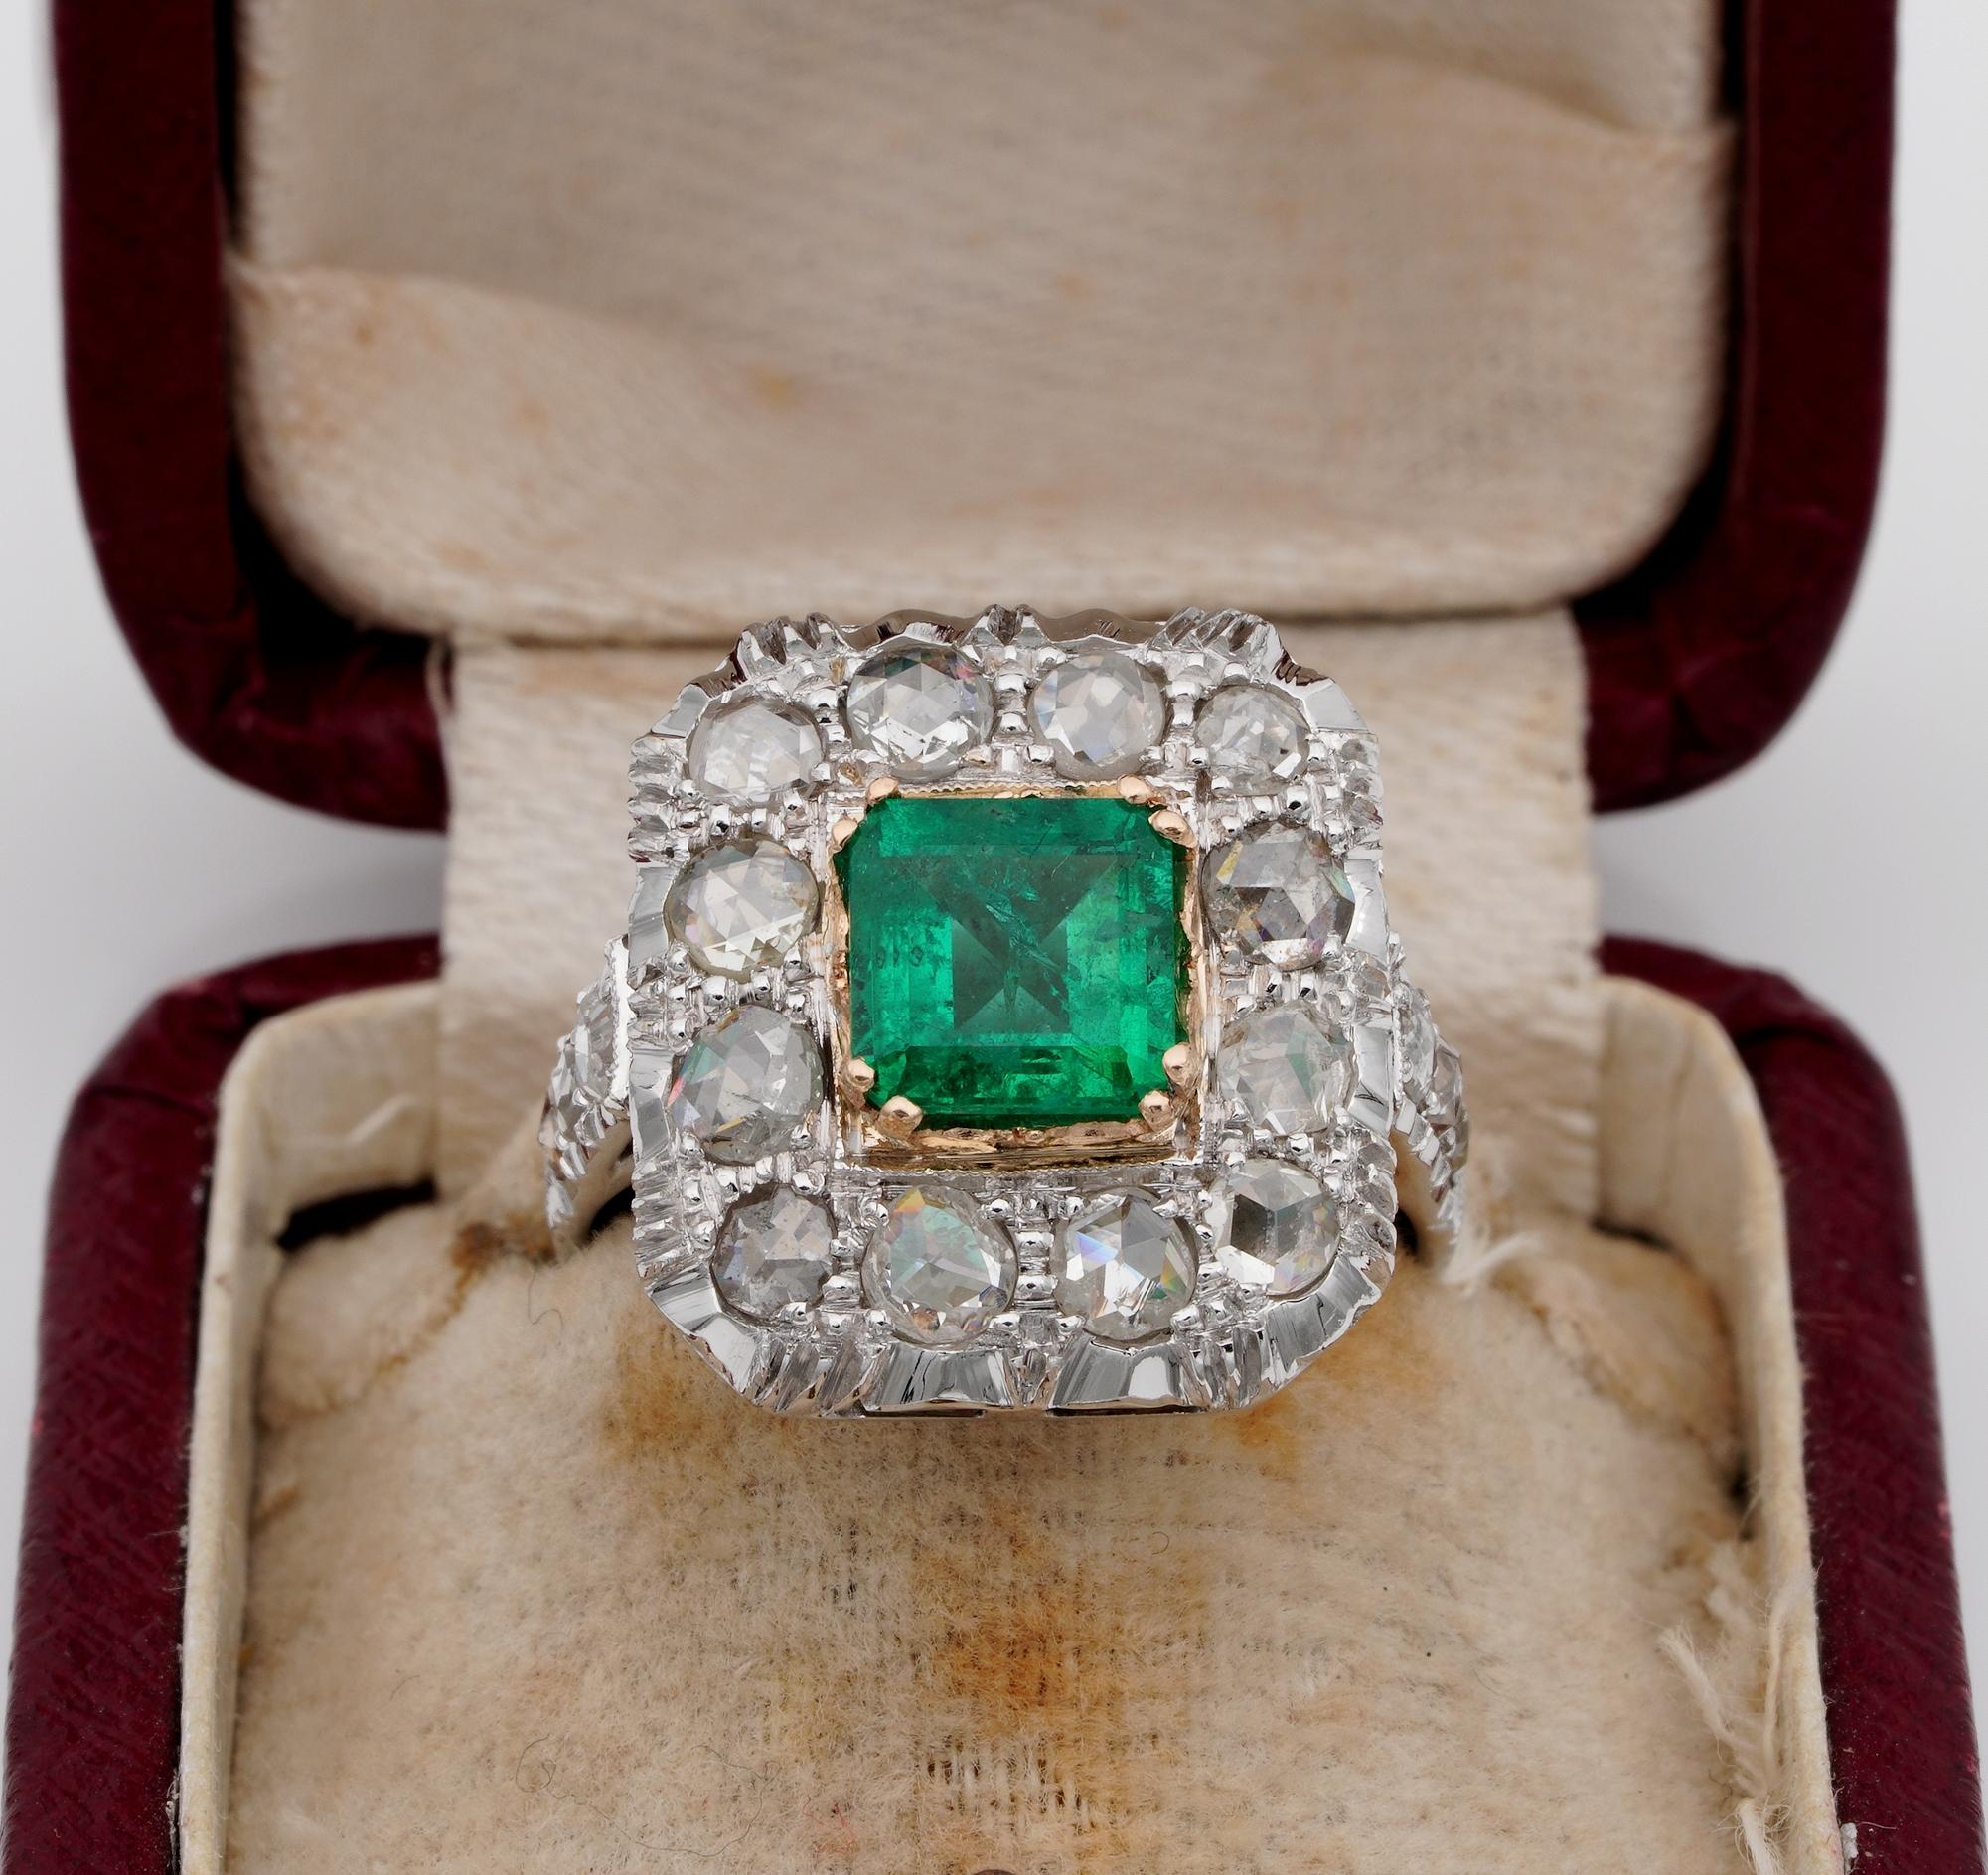 An Unique Treasure early 20's!

An outstanding early Art Deco example of Colombian Emerald and Diamond ring
Charming large rectangular crown, very eye-catching, unusually set with Rose Cut Diamonds which makes it even more distinctive and